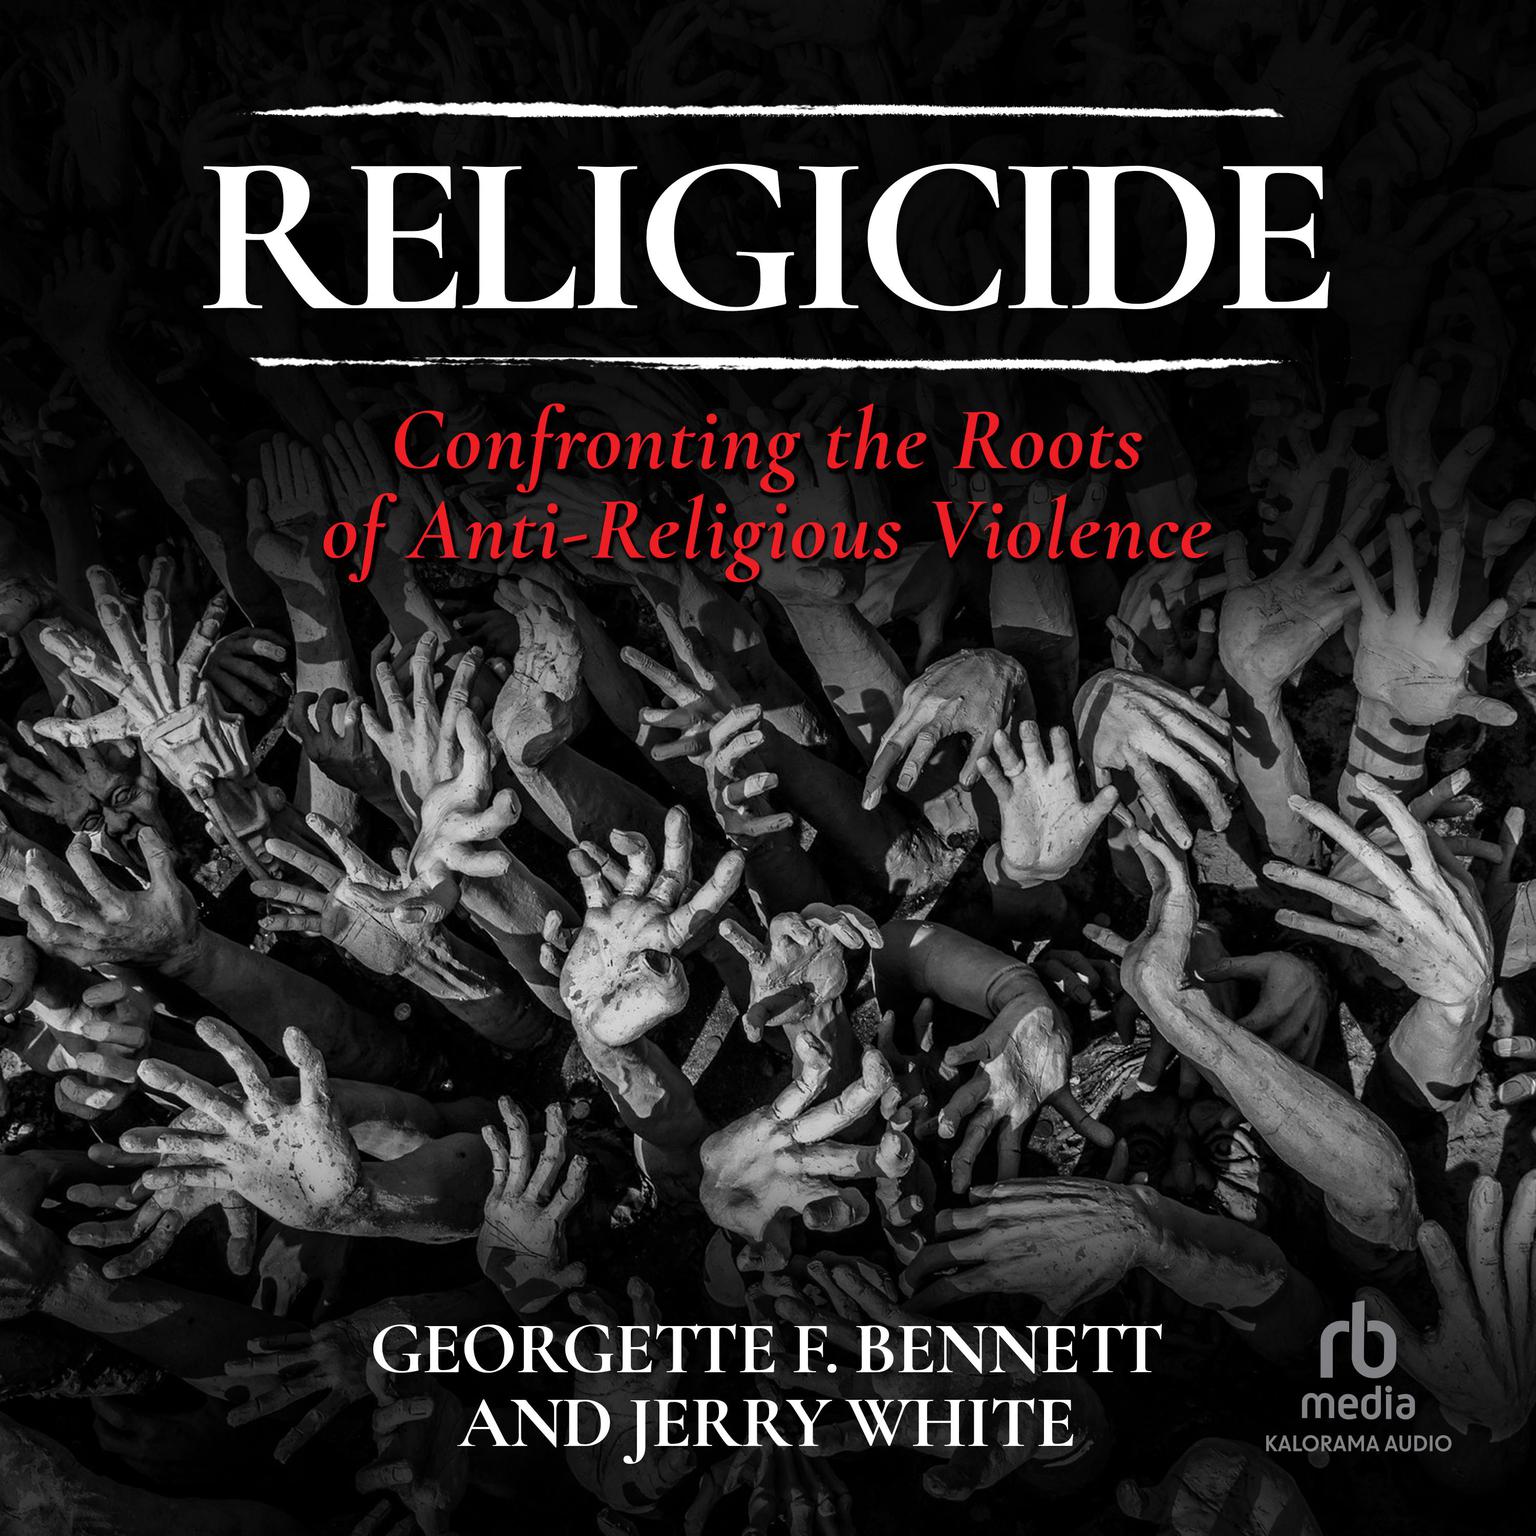 Religicide: Confronting the Roots of Anti-Religious Violence Audiobook, by Jerry White